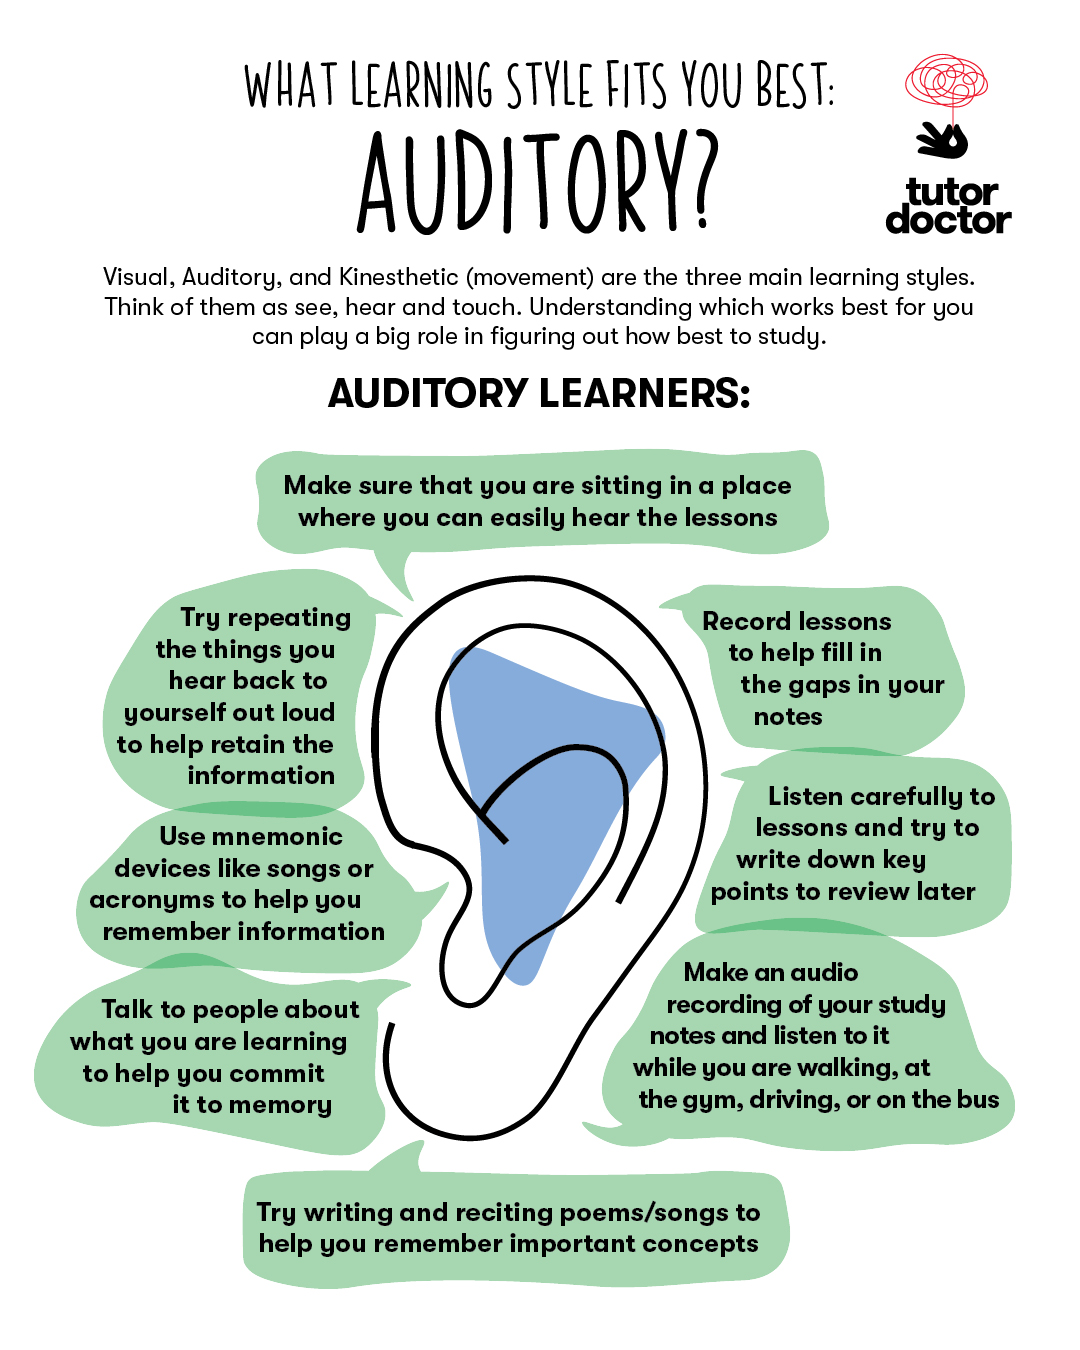 tips for auditory learners